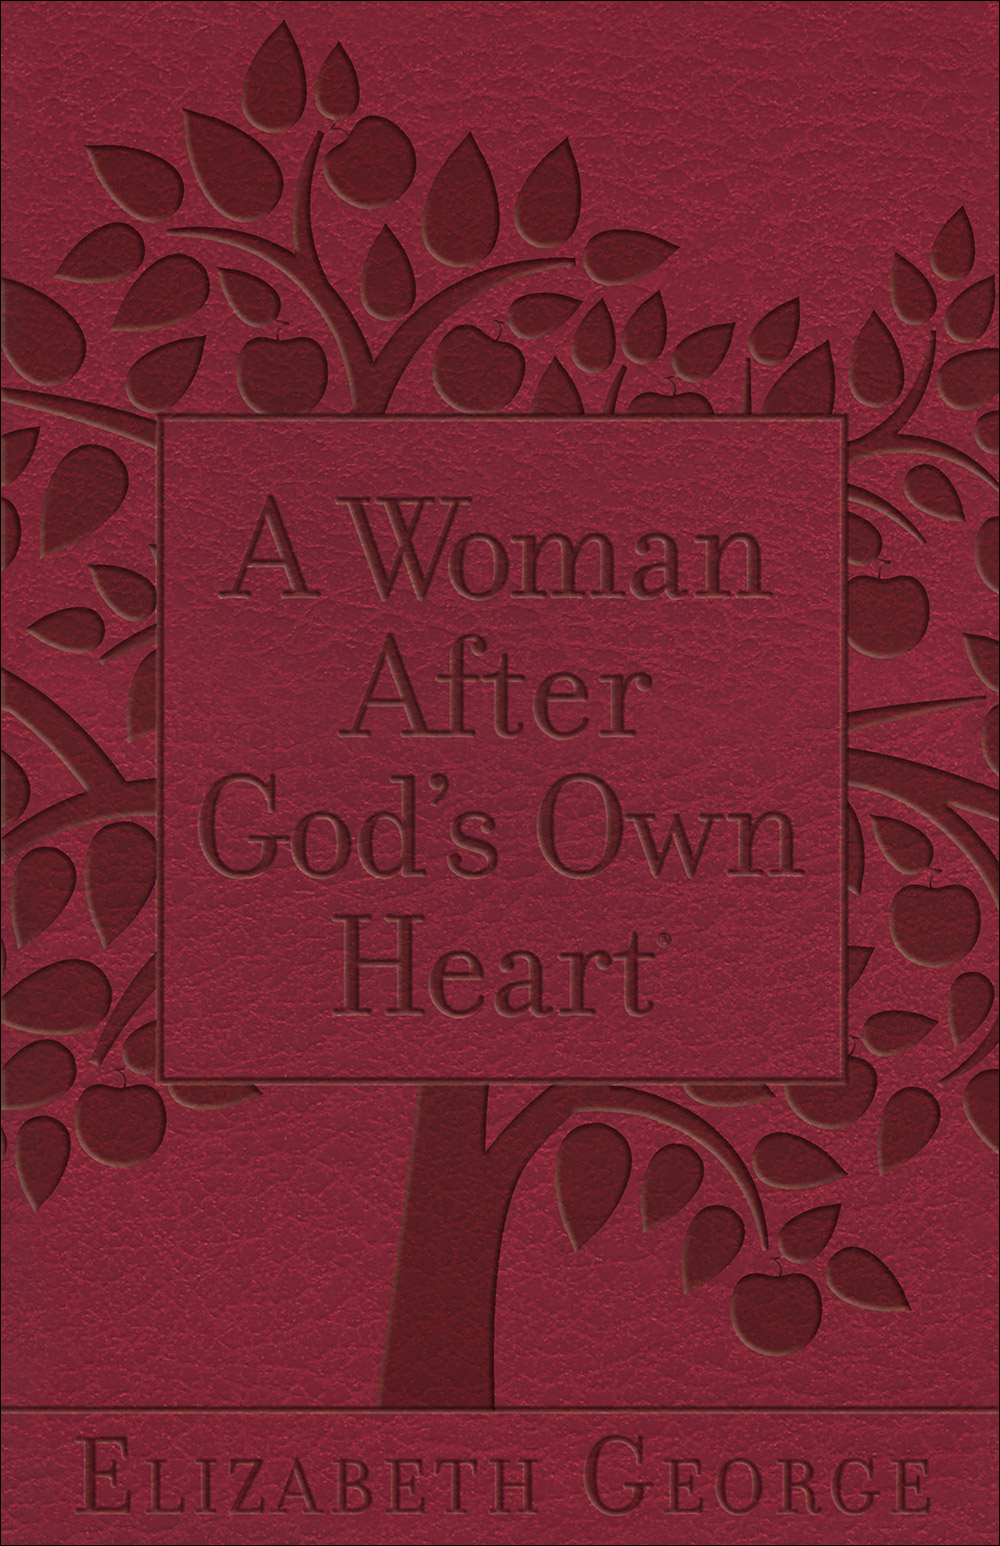 a woman after gods own heart pdf free download